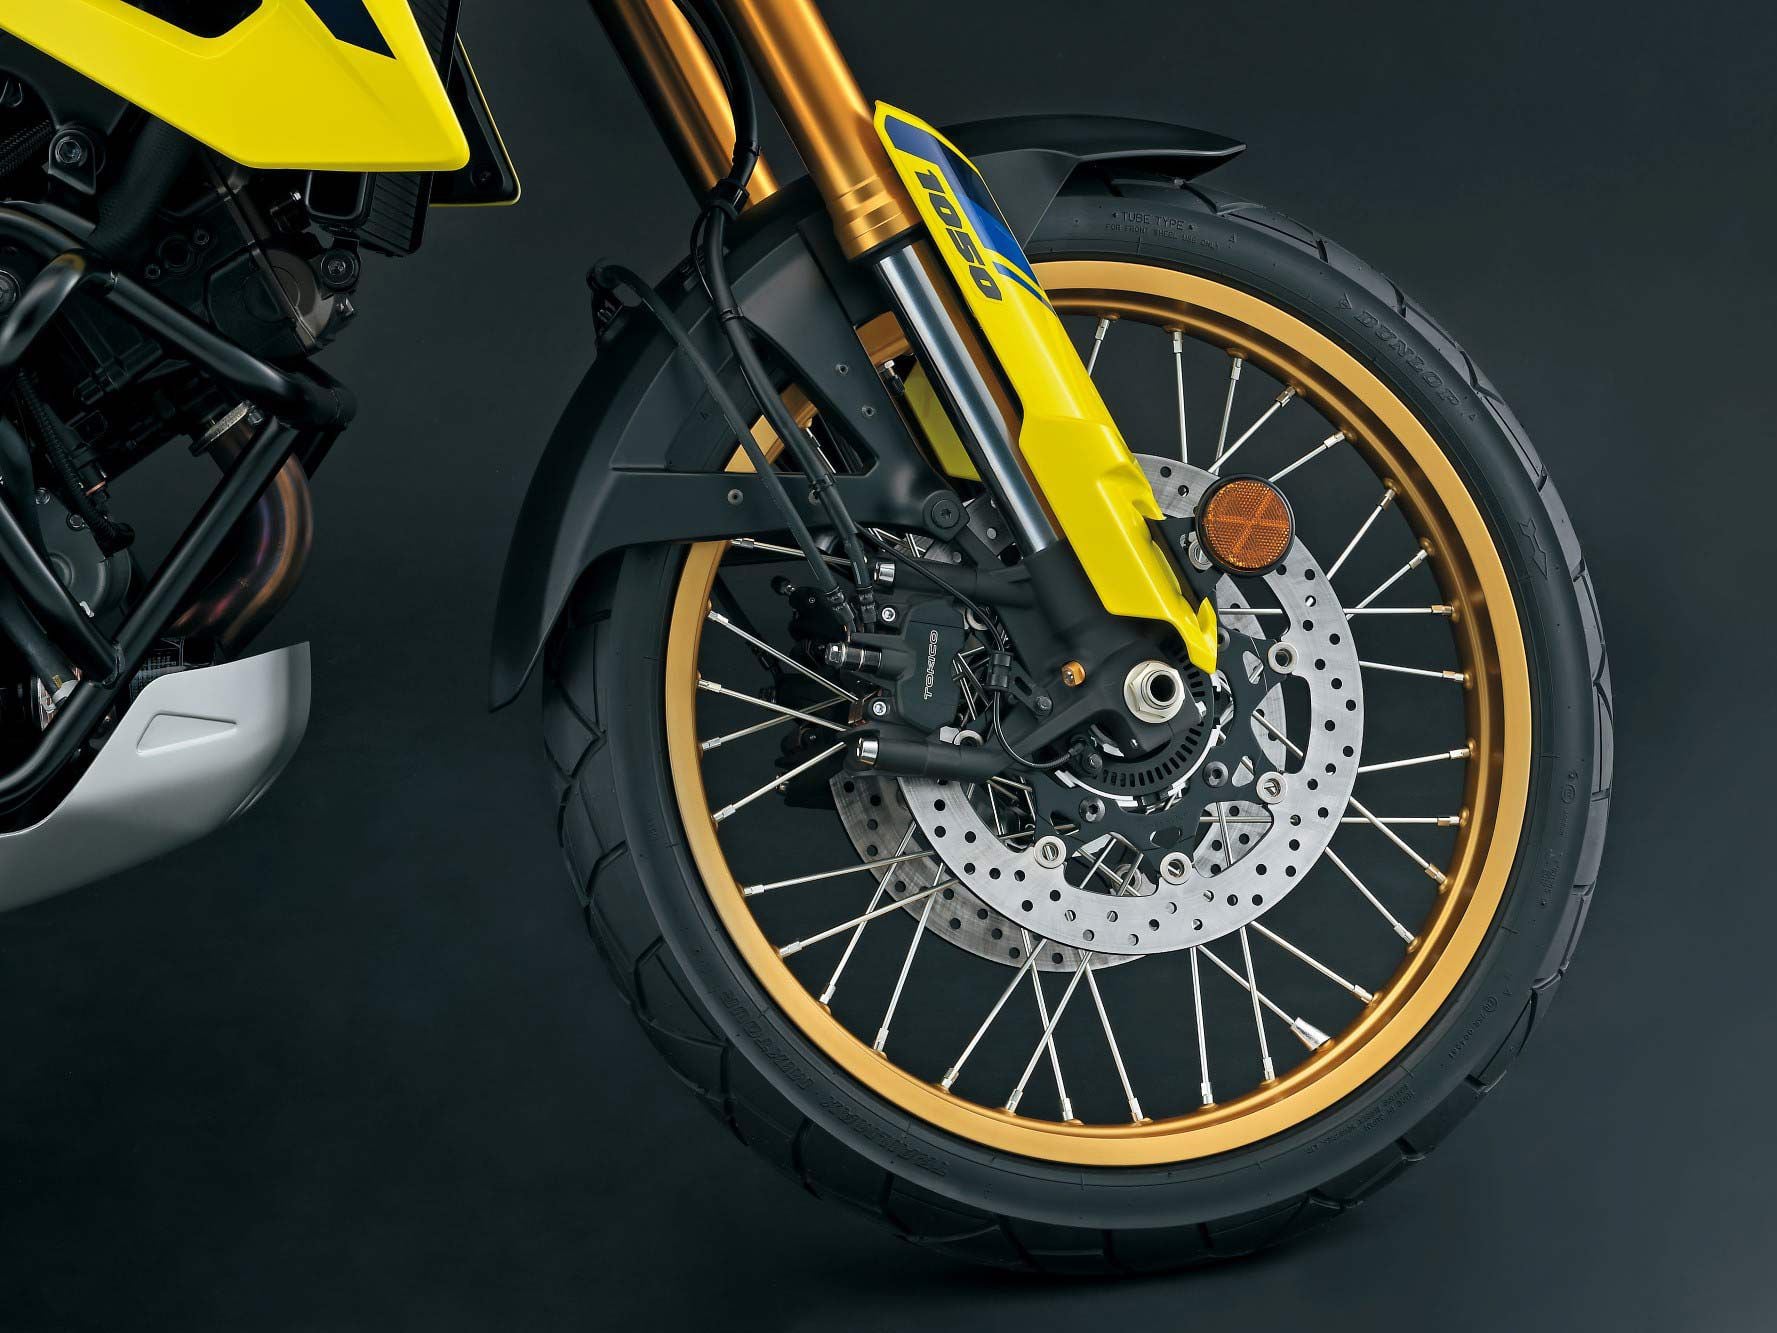 Suzuki’s new-for-2023 V-Strom 1050DE and 1050DE Adventure get a 21-inch front wheel, which uses an inner tube, while the rear wheel is tubeless.